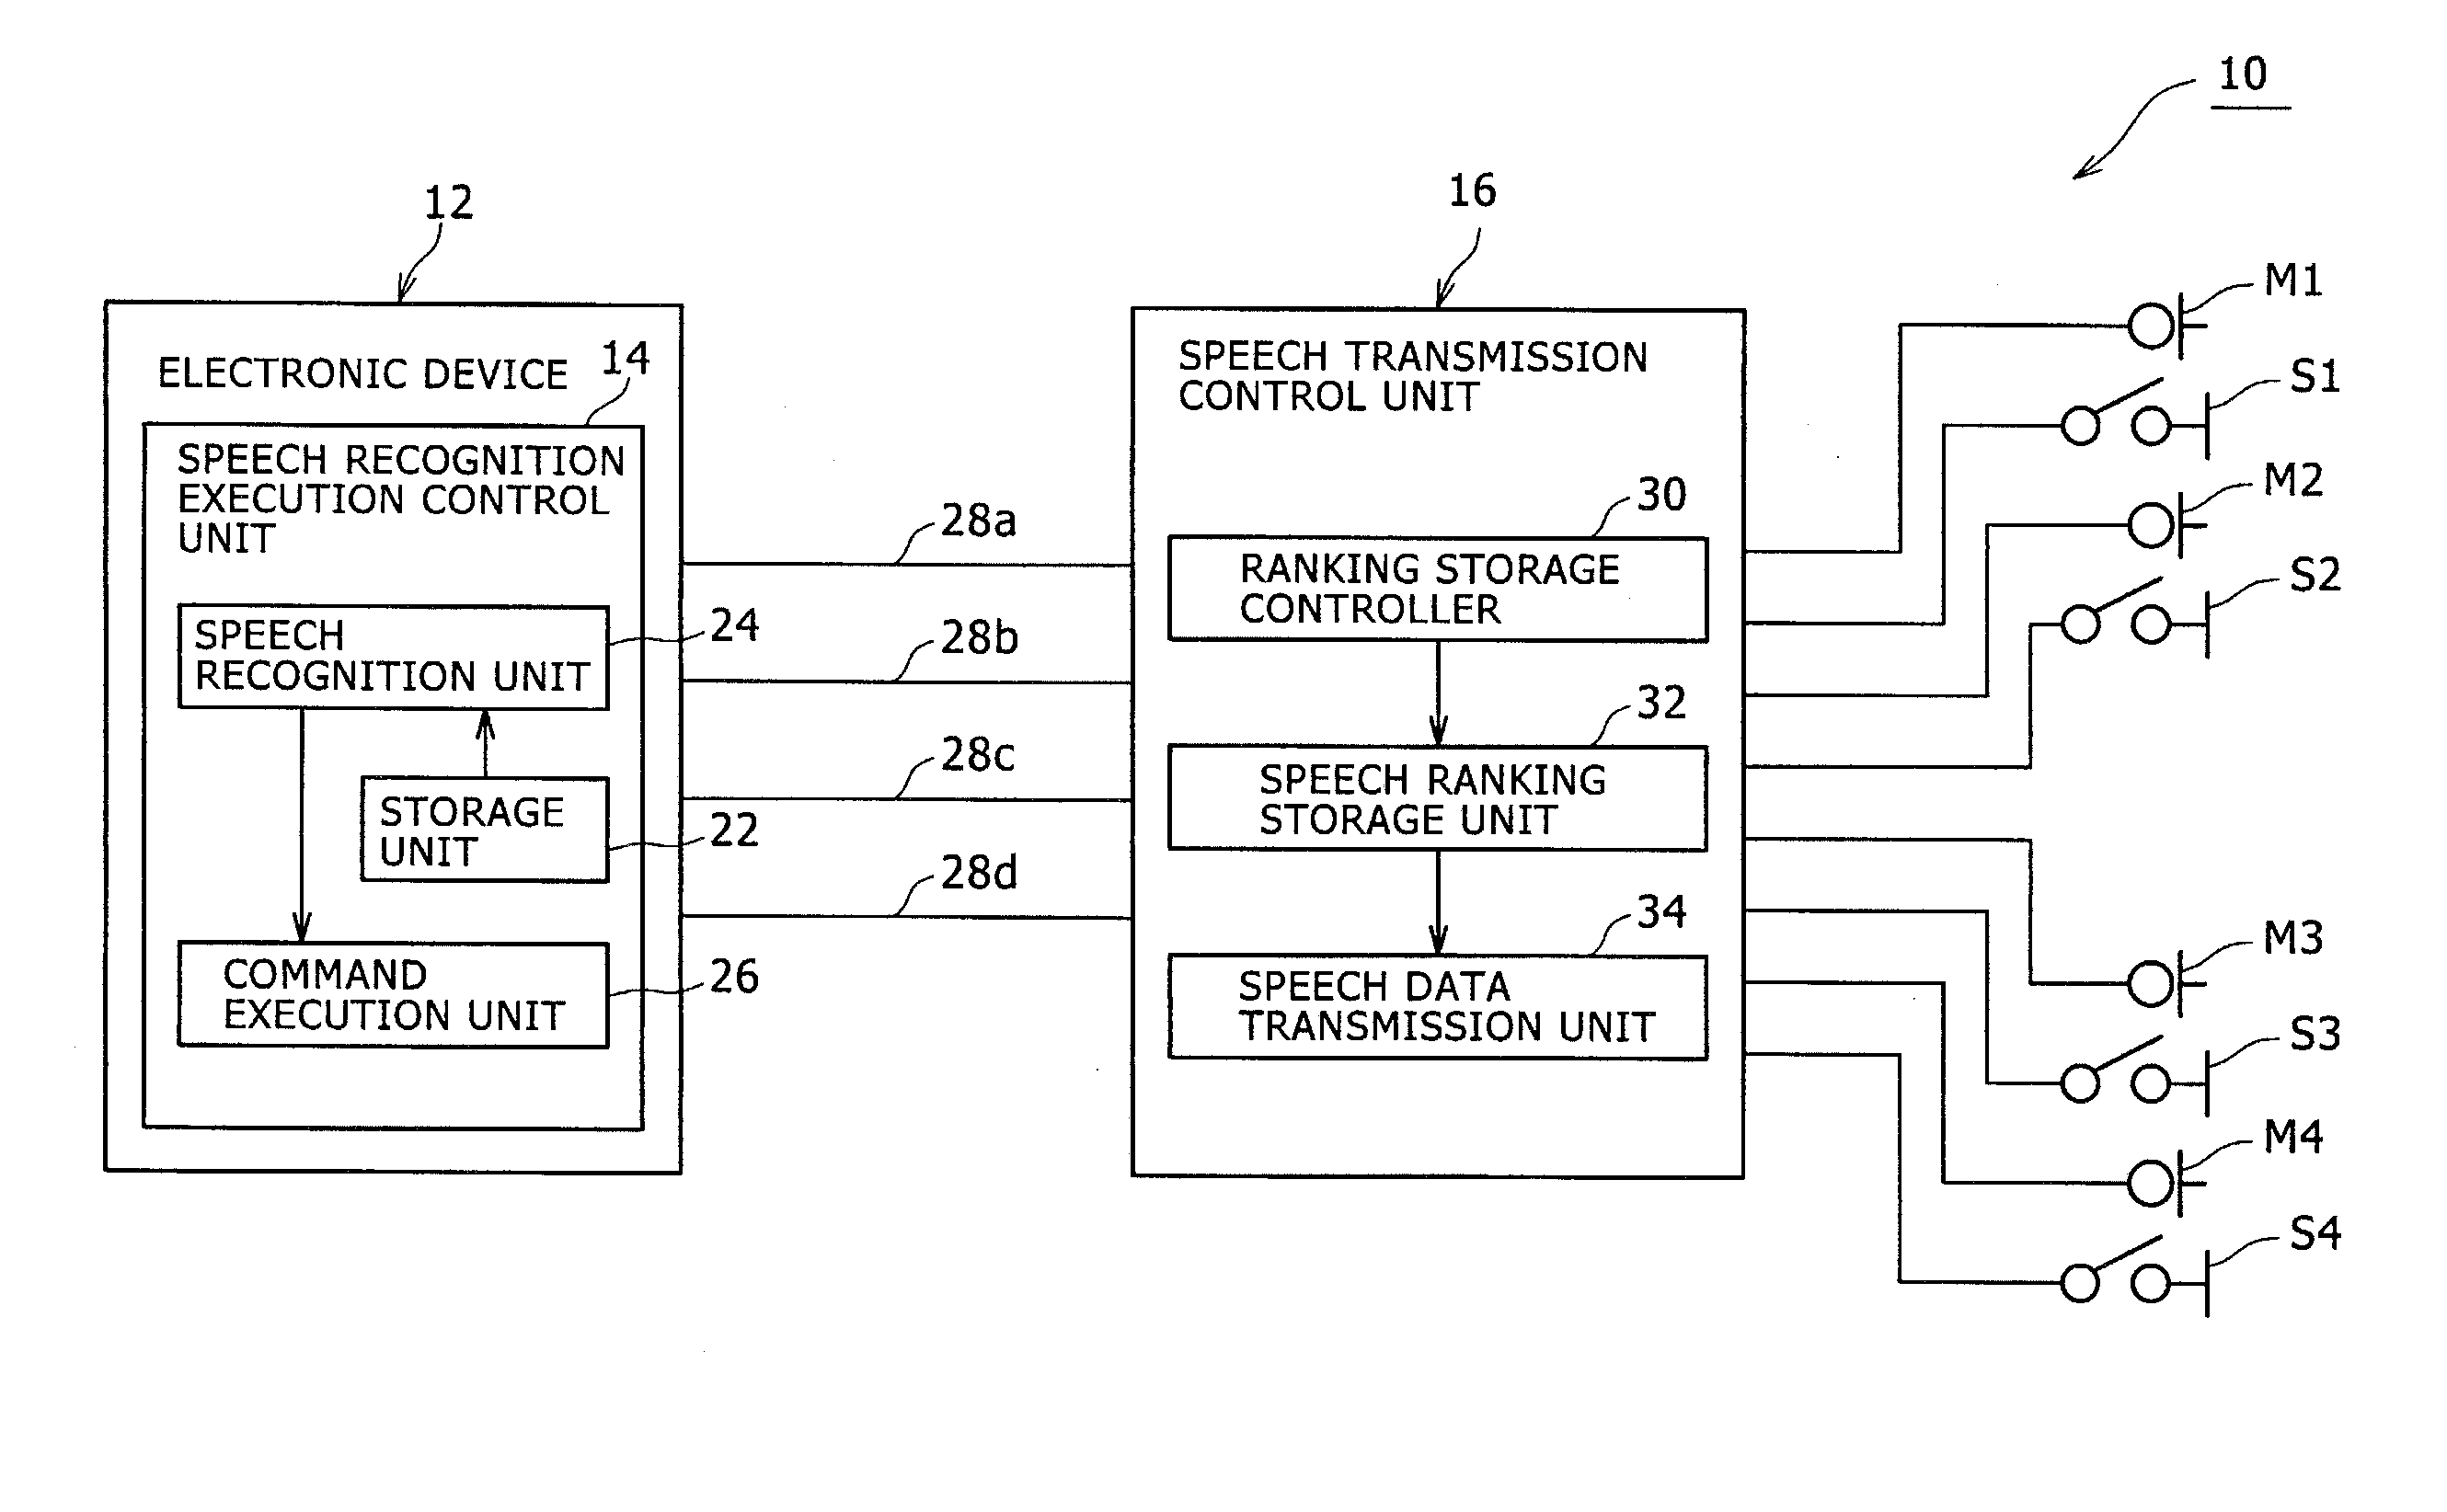 Speech recognition control device